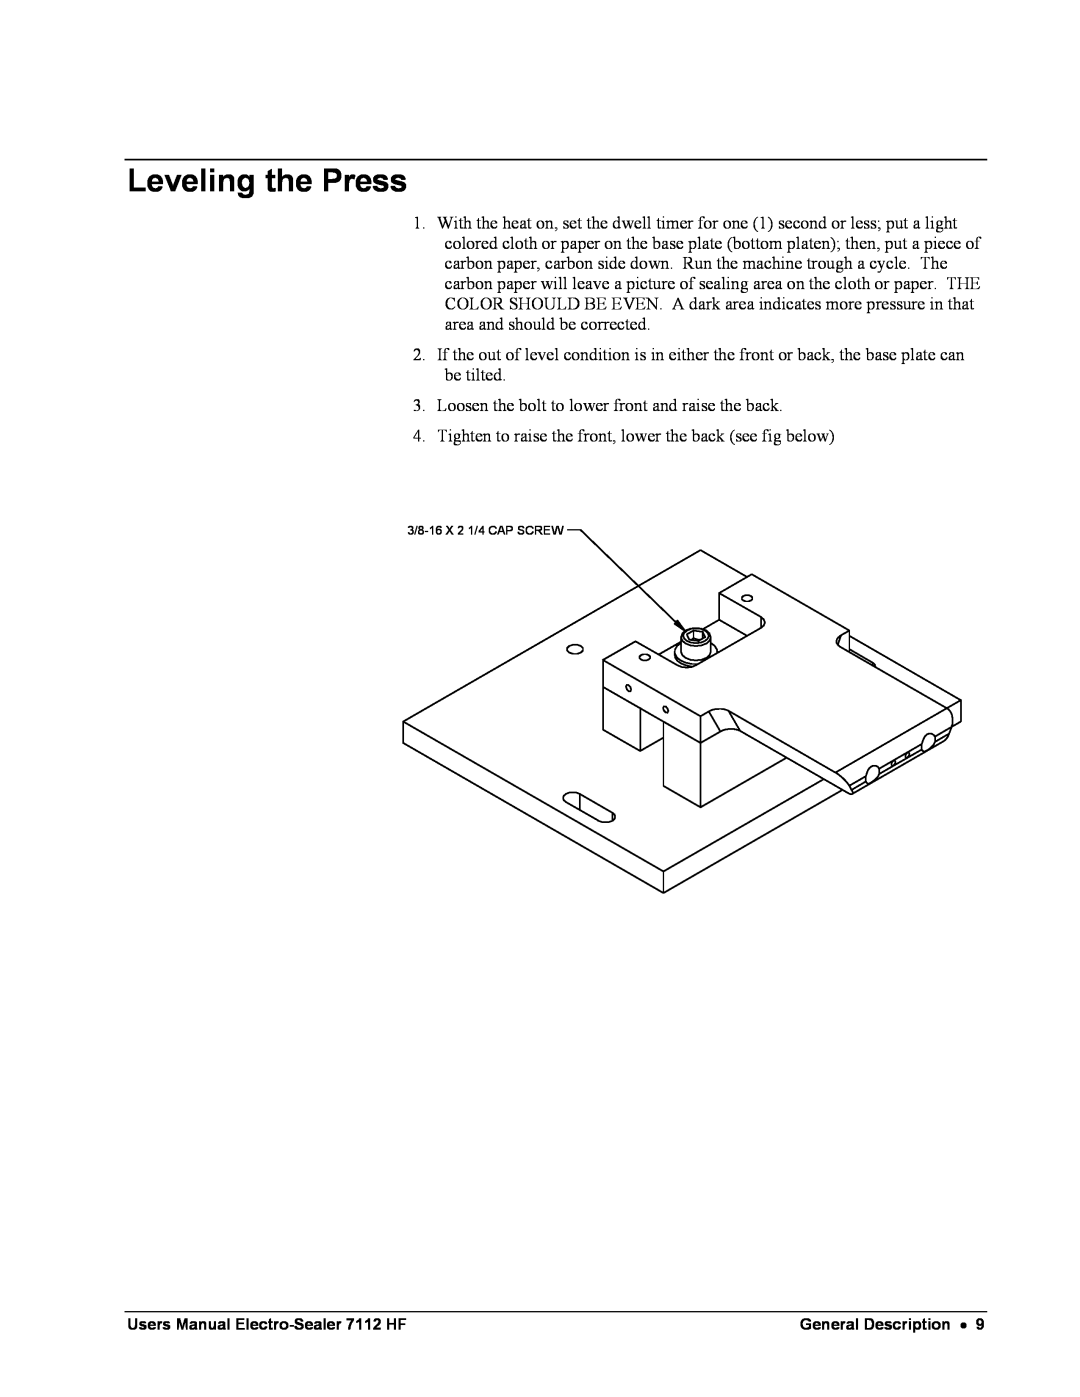 Avery 7112 HF user manual Leveling the Press 